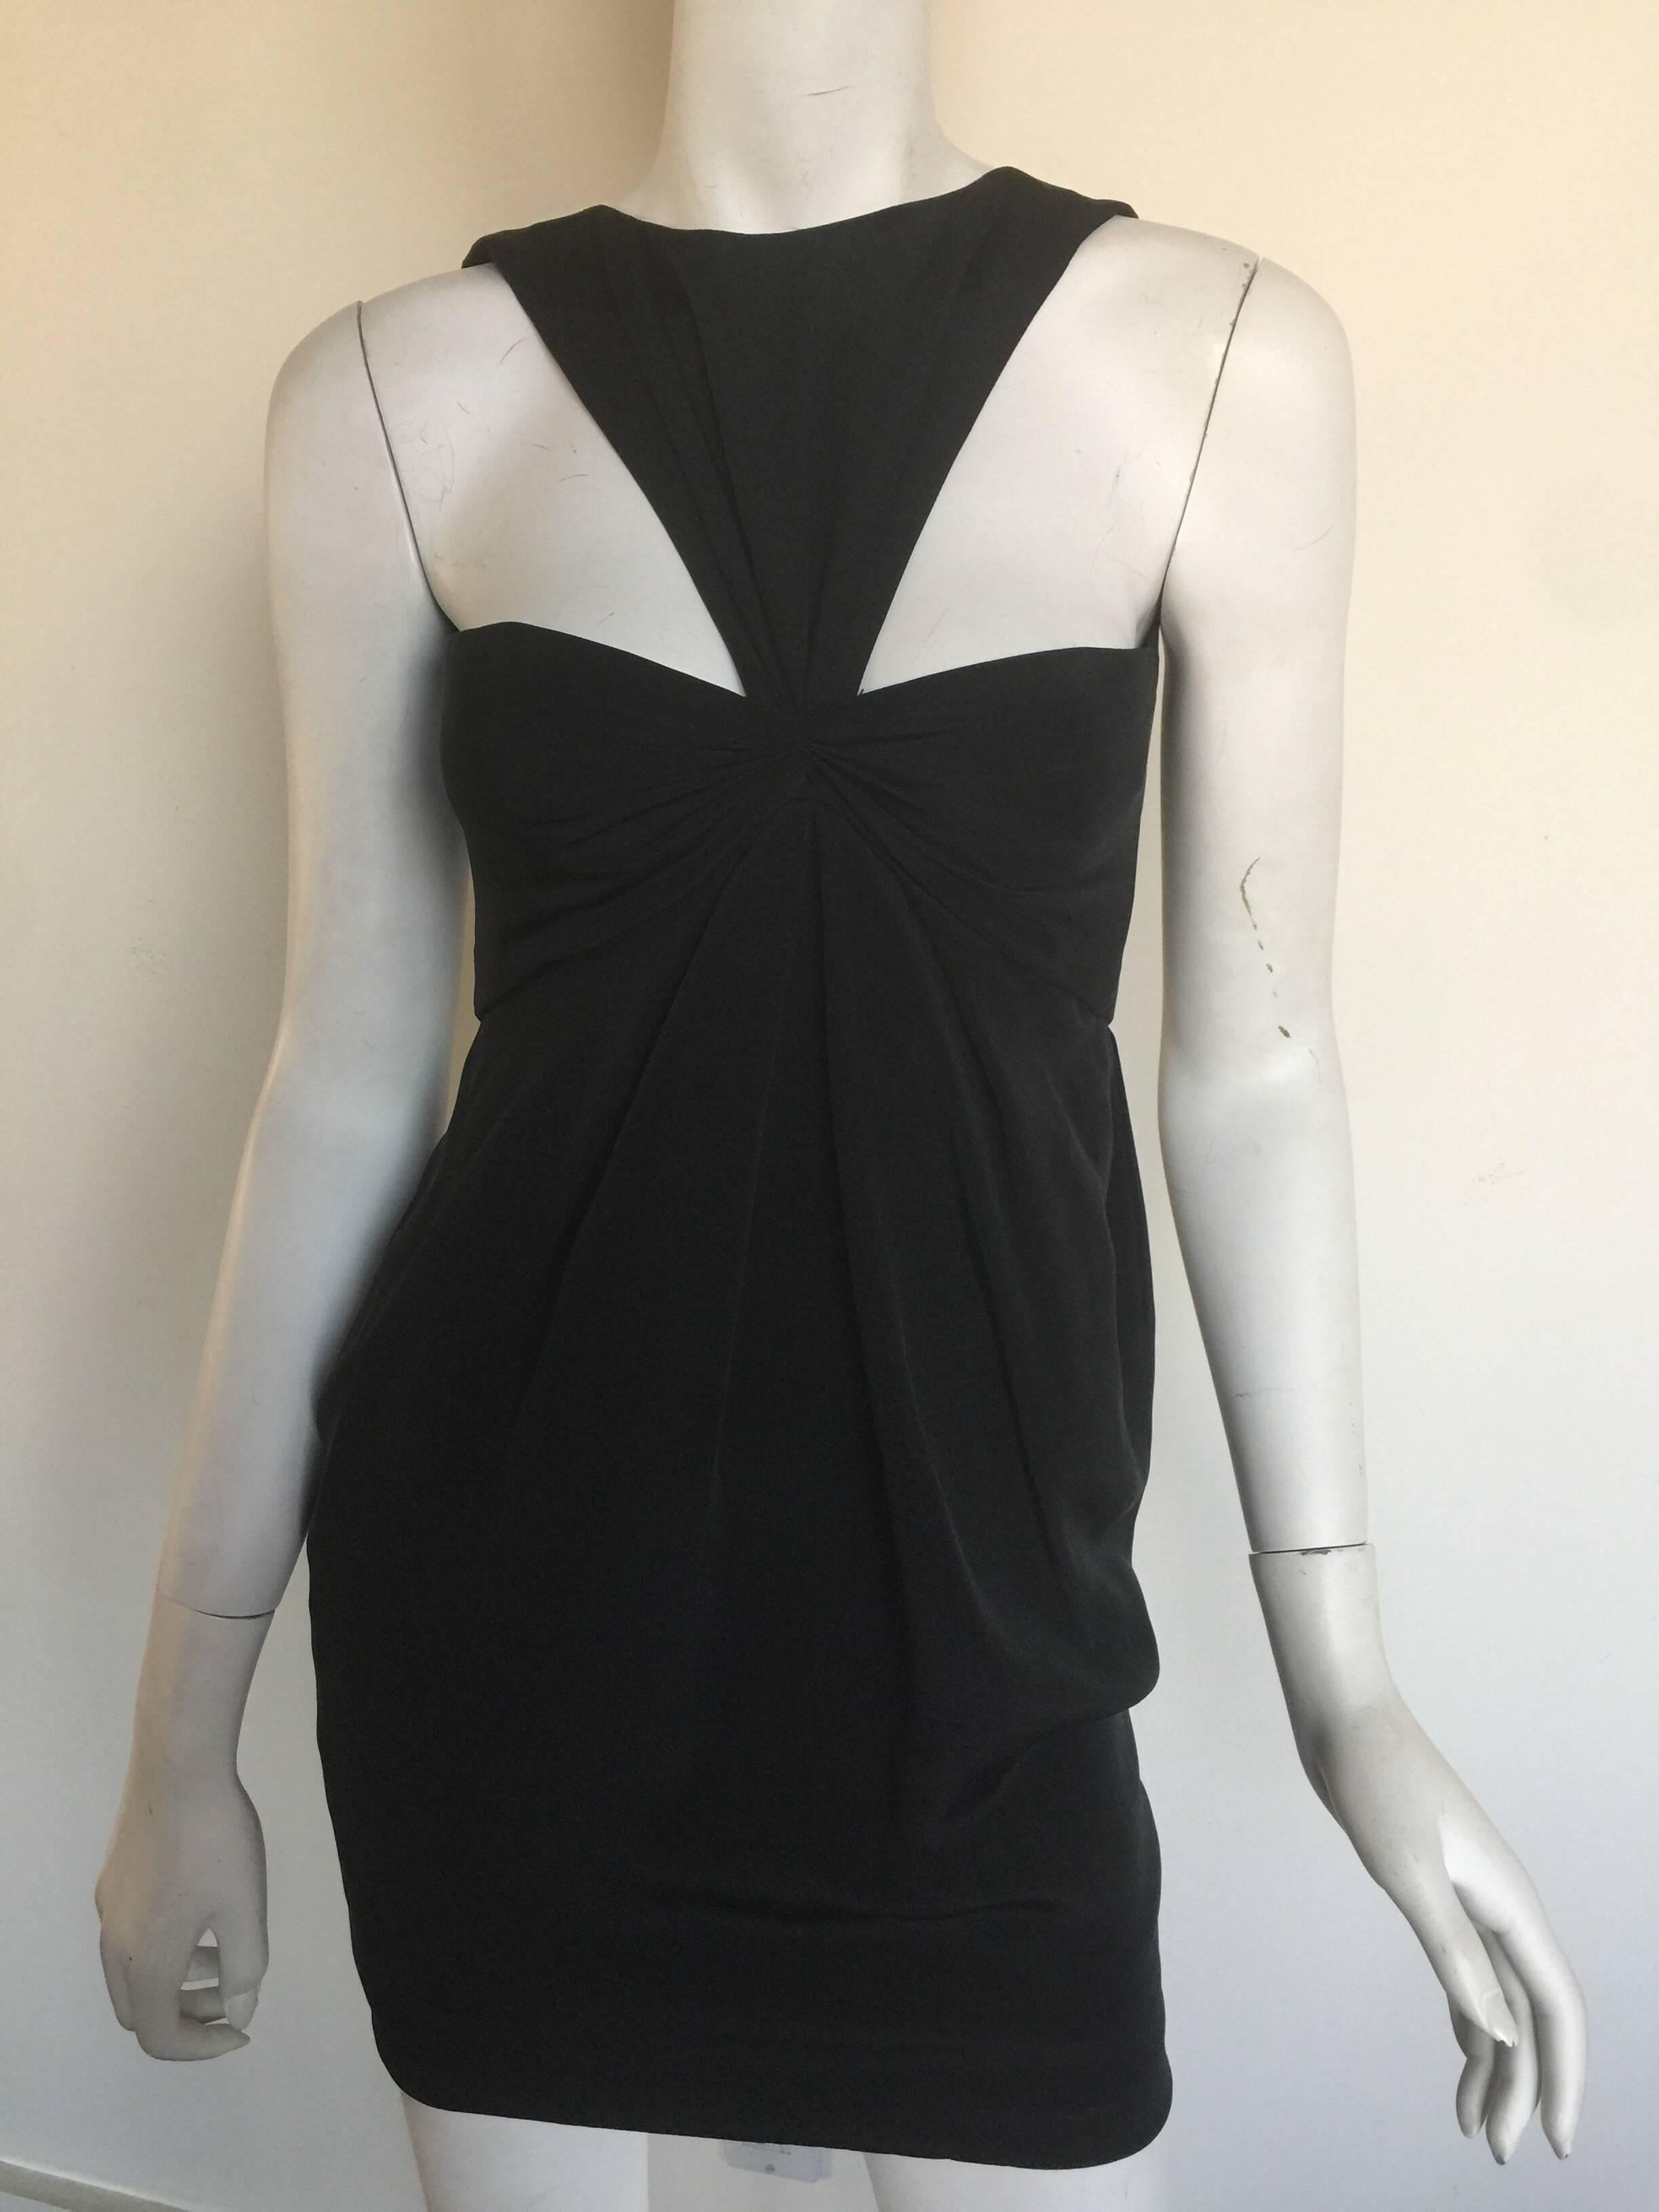 This iconic Bill Blass mini dress is from the 1980s.   It is a silk crepe and fits a 0-2.  There is about 2 inches in hemline that can be let out.